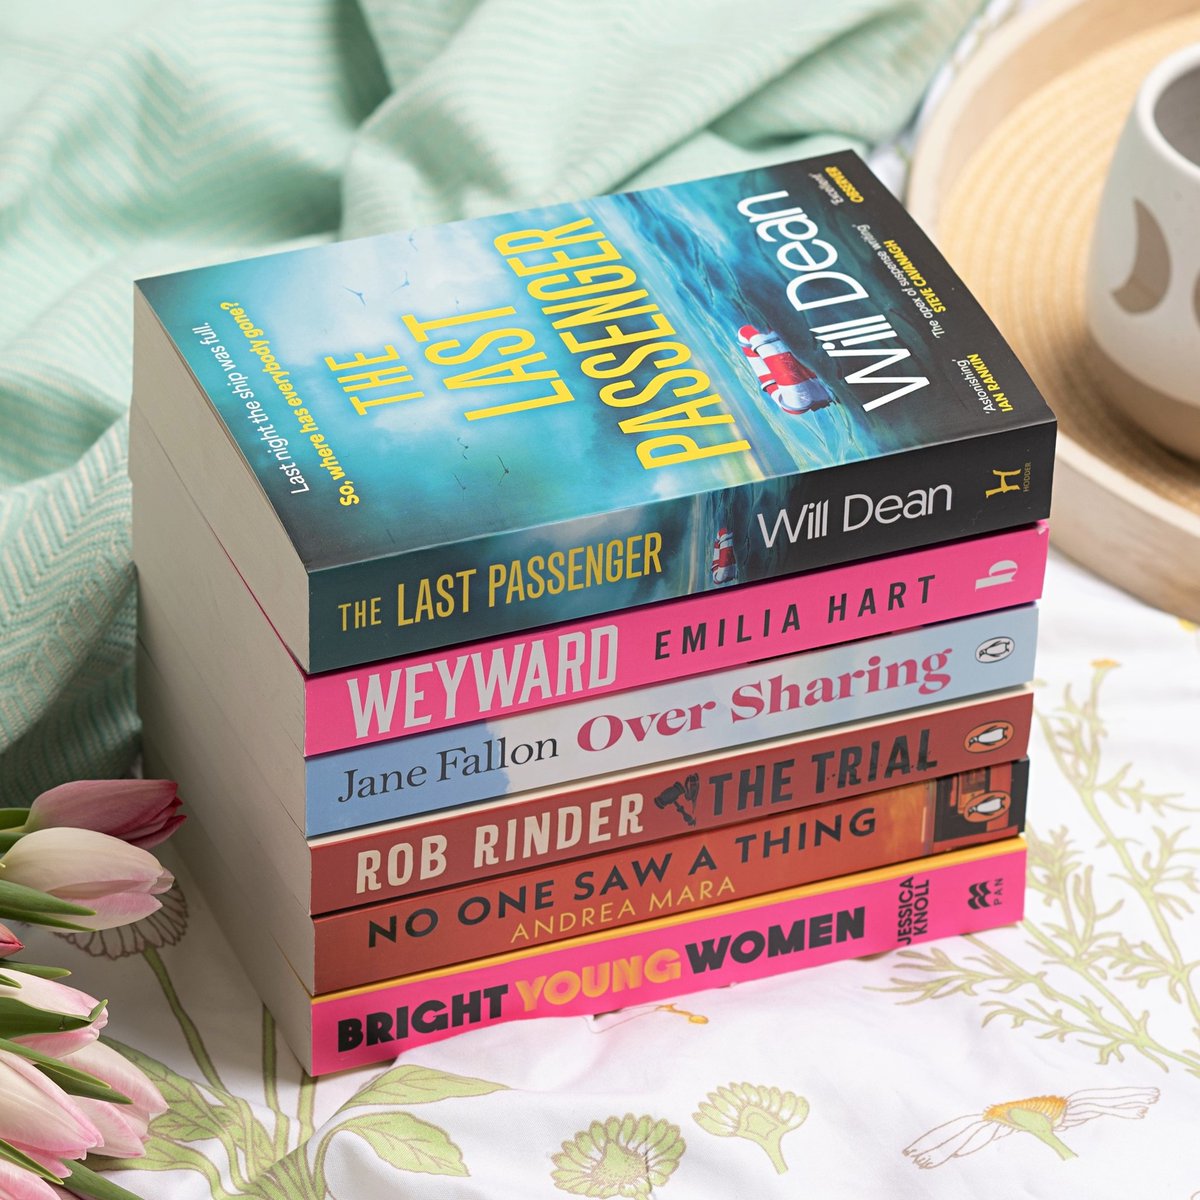 The brand new @whsmith Book Club with Richard and Judy Bundle is here with six wonderful new titles to add to your bookshelf! 📚
#RichardandJudyBookClub #WHSmithDunstable #dunstable #quadrant #quadrantshoppingcentre #quadrantdunstable #dunstableshoppingcentre